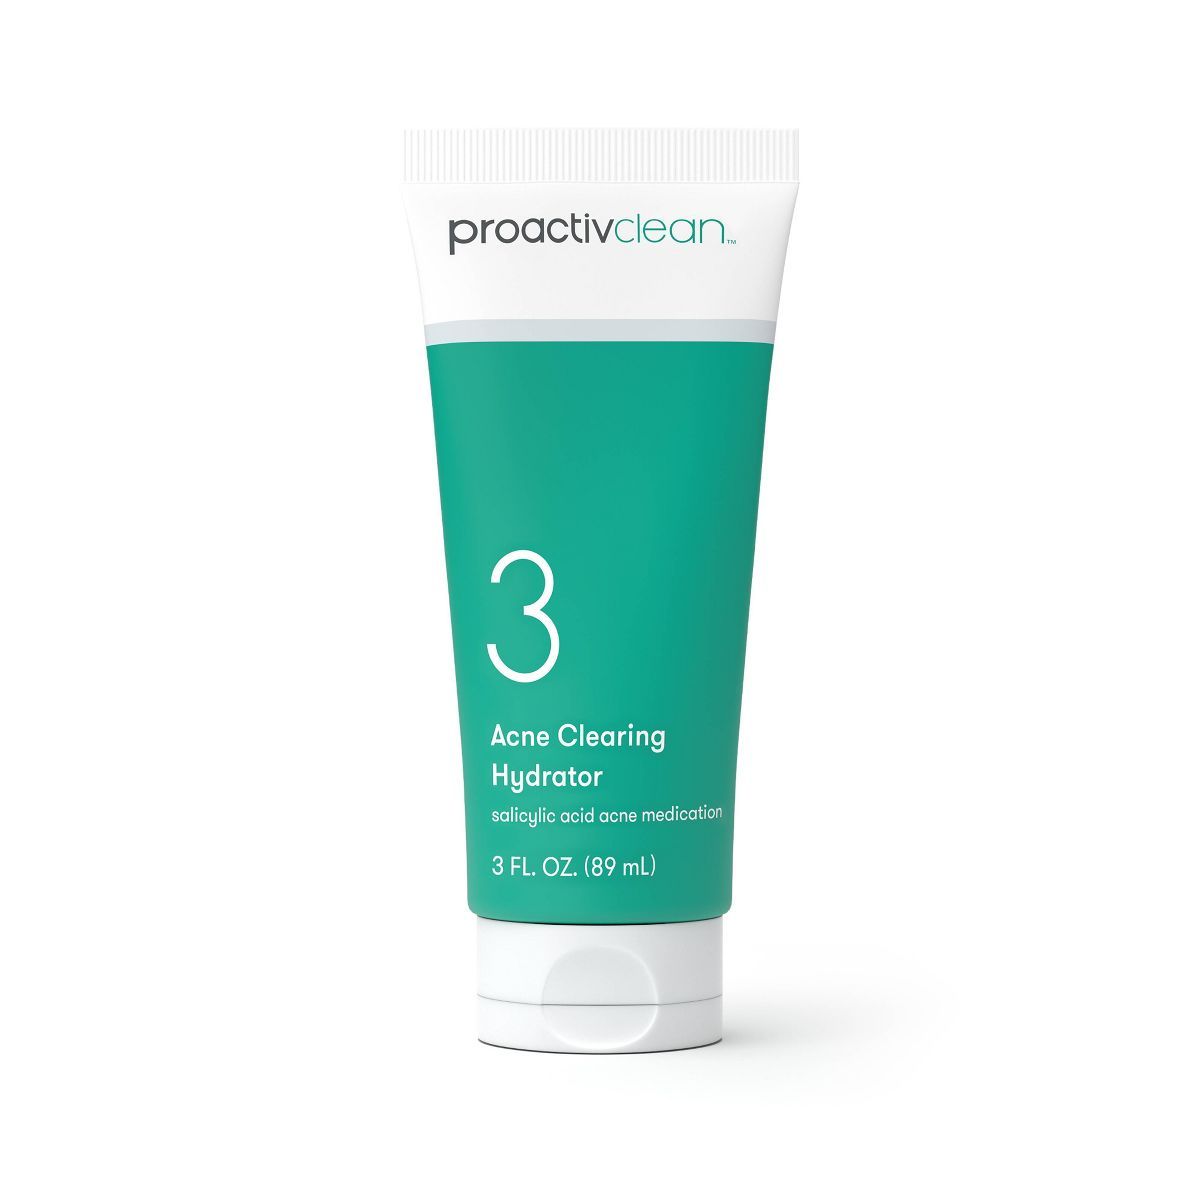 Proactiv Clean Acne Clearing Hydrator - 3 fl oz | Target